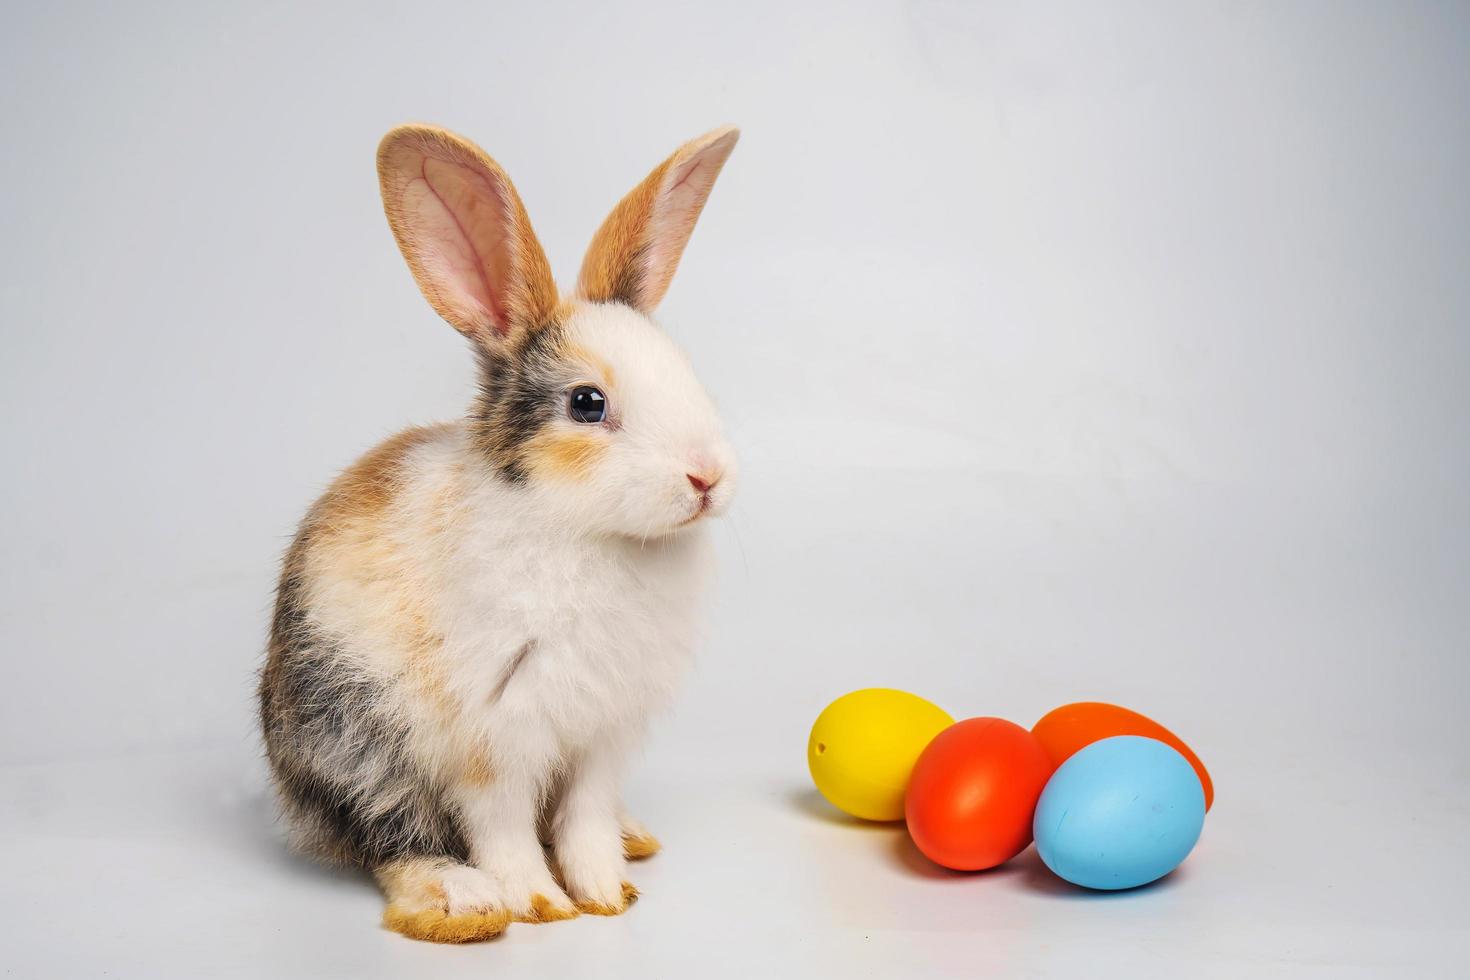 Baby light brown and white spotted bunny or rabbit and colorful Esther's eggs isolated on white background, Rabbit standing and action. photo